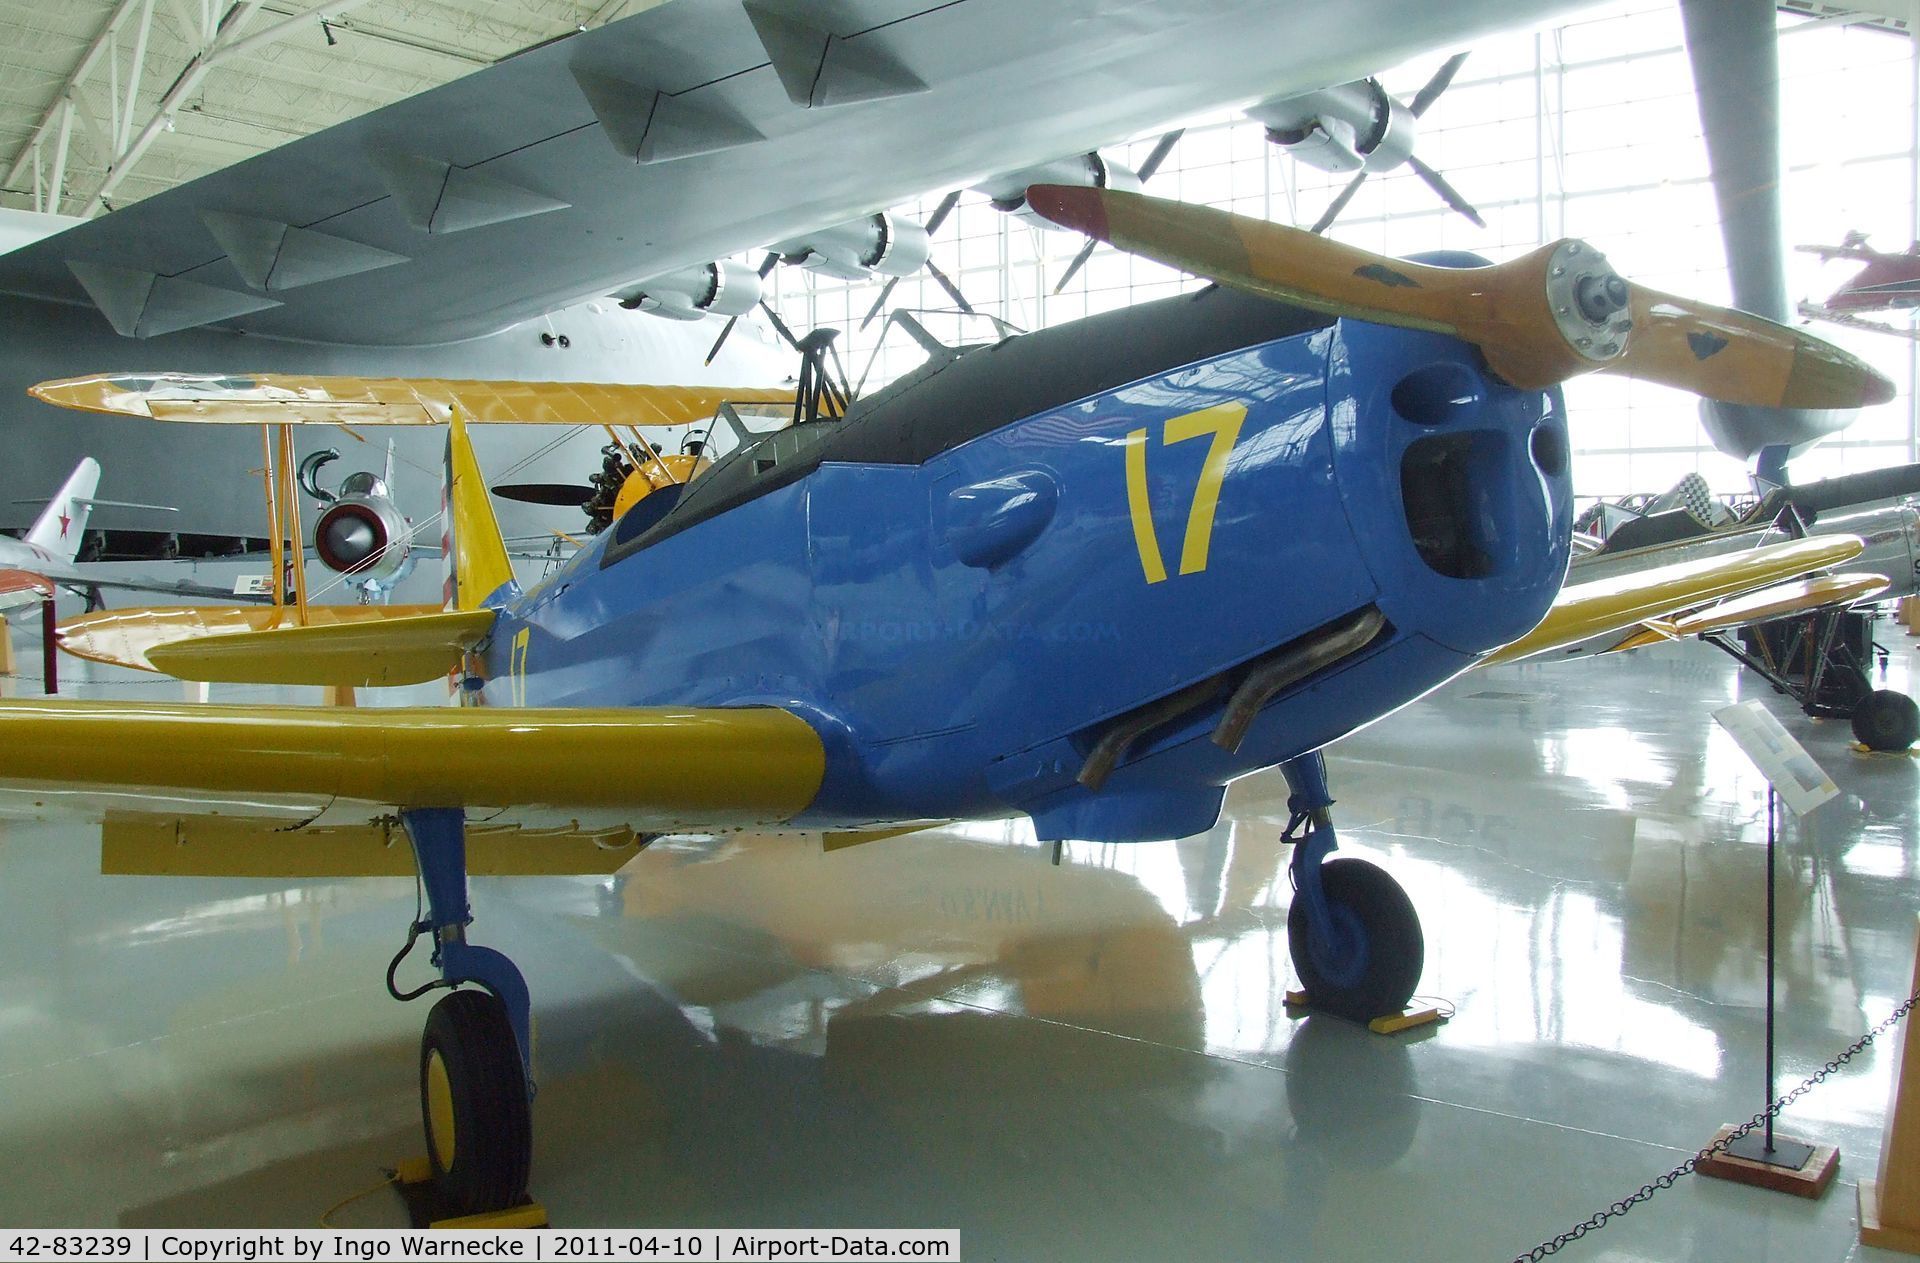 42-83239, 1943 Fairchild PT-19B C/N T43-5826, Fairchild PT-19B at the Evergreen Aviation & Space Museum, McMinnville OR